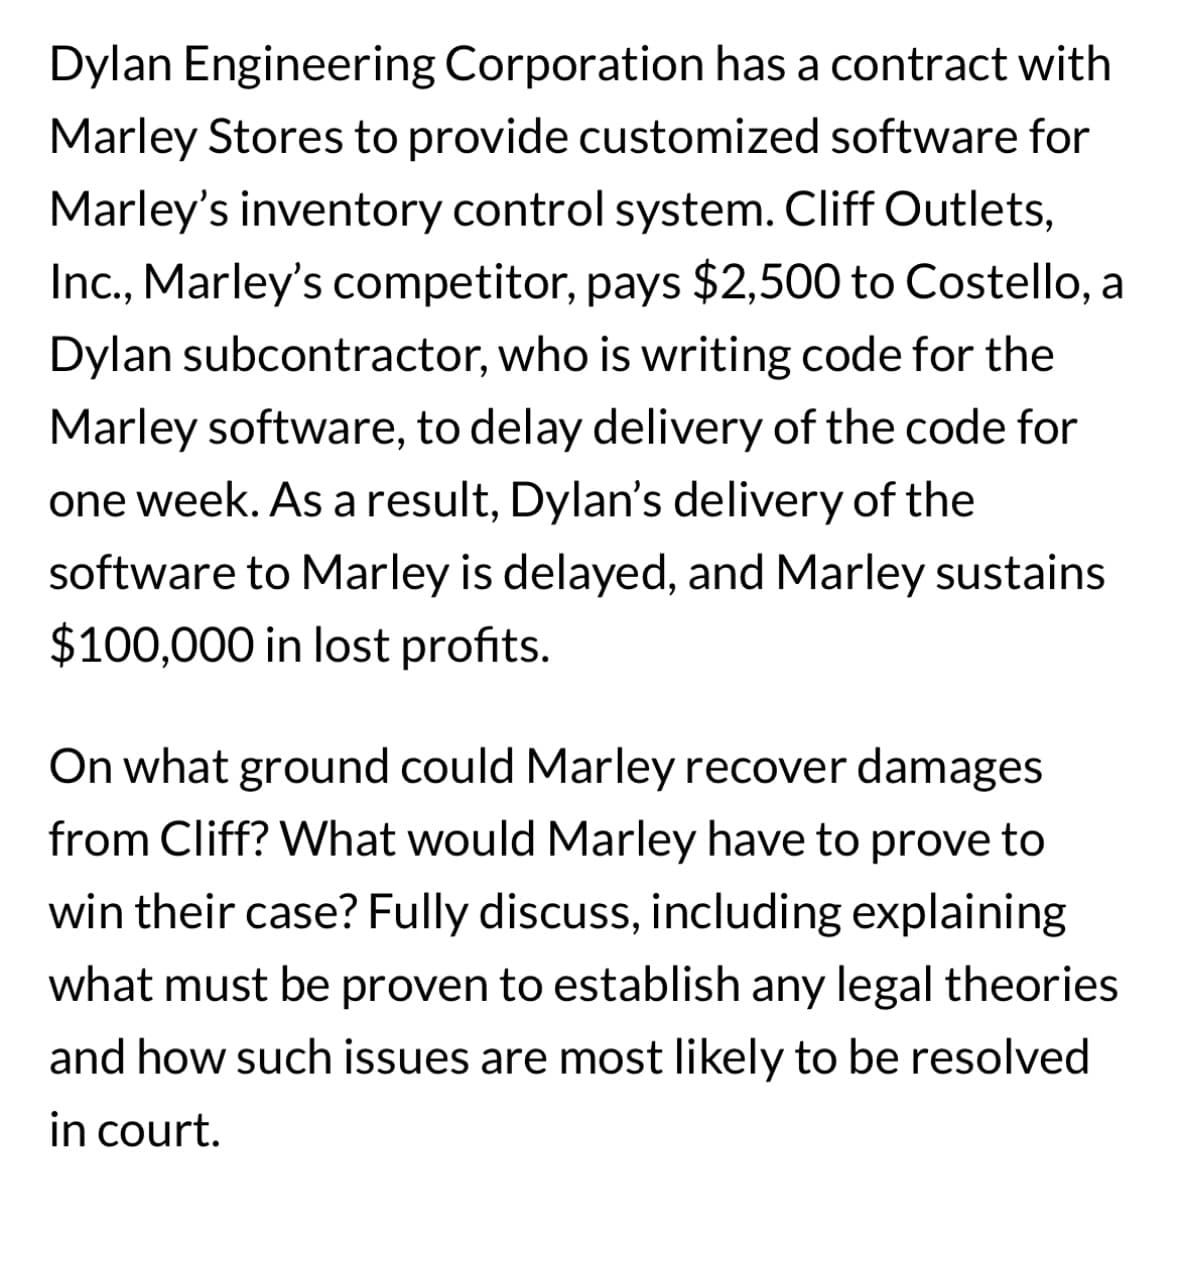 Dylan Engineering Corporation has a contract with
Marley Stores to provide customized software for
Marley's inventory control system. Cliff Outlets,
Inc., Marley's competitor, pays $2,500 to Costello, a
Dylan subcontractor, who is writing code for the
Marley software, to delay delivery of the code for
one week. As a result, Dylan's delivery of the
software to Marley is delayed, and Marley sustains
$100,000 in lost profits.
On what ground could Marley recover damages
from Cliff? What would Marley have to prove to
win their case? Fully discuss, including explaining
what must be proven to establish any legal theories
and how such issues are most likely to be resolved
in court.